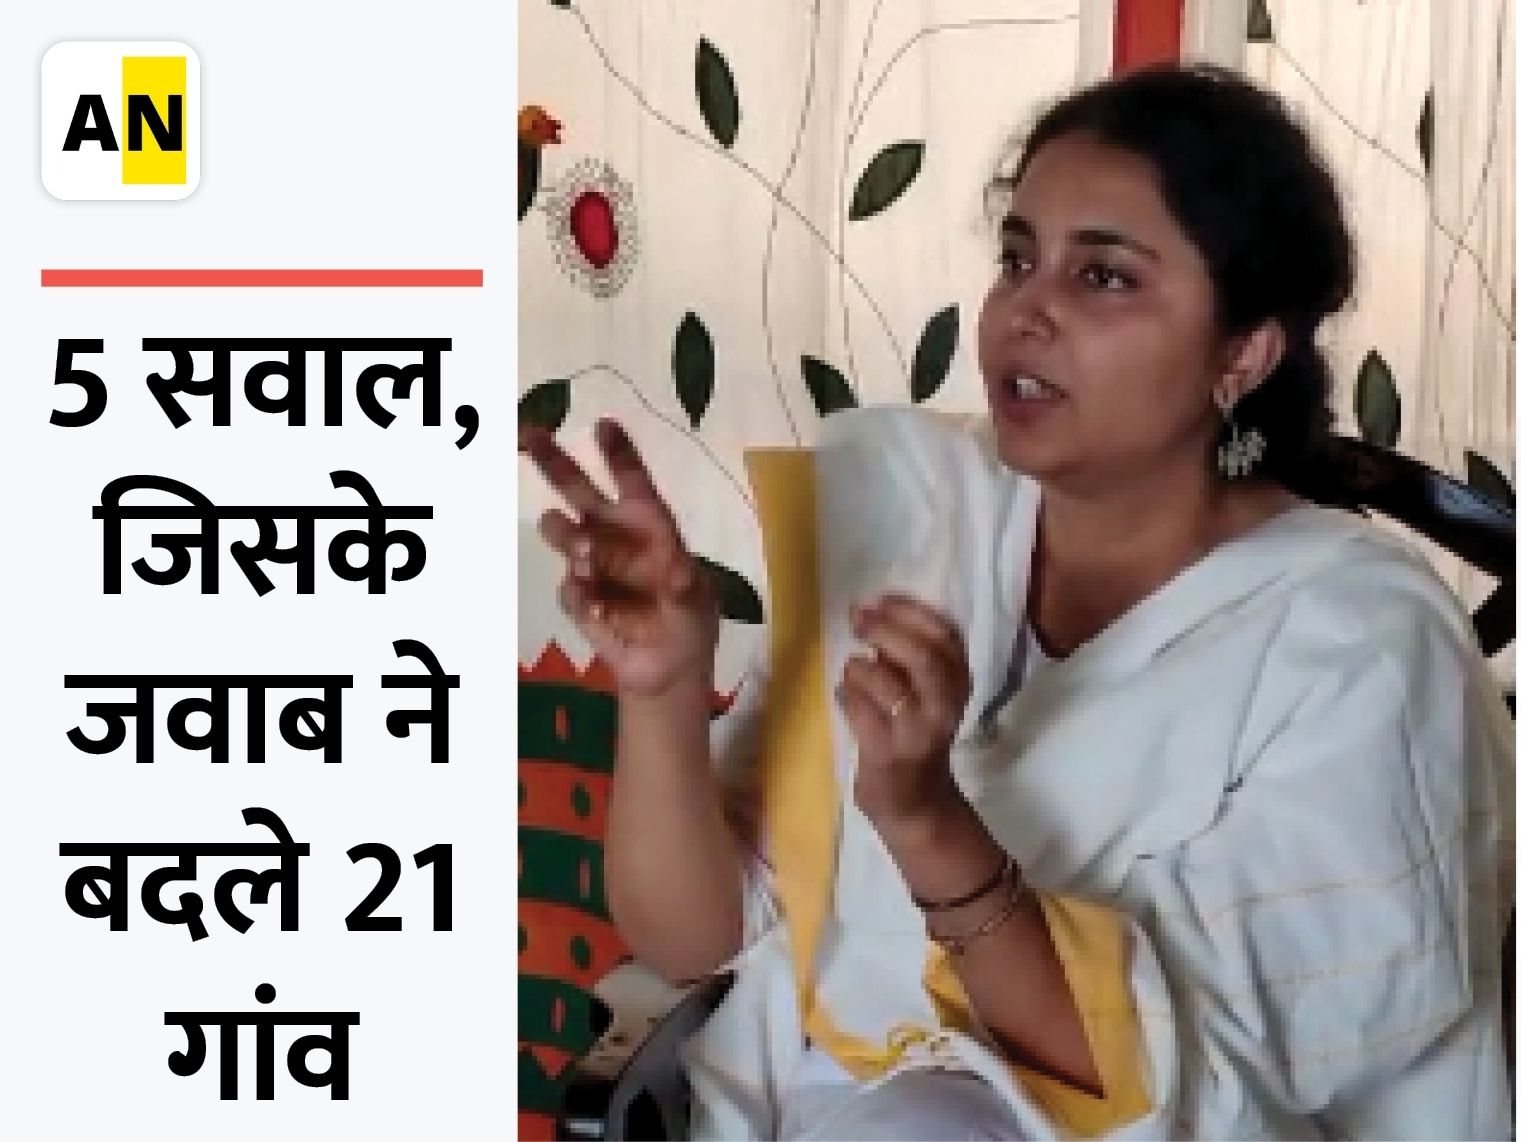 5 media questions from Setika Singh whose answer brought change in 21 villages